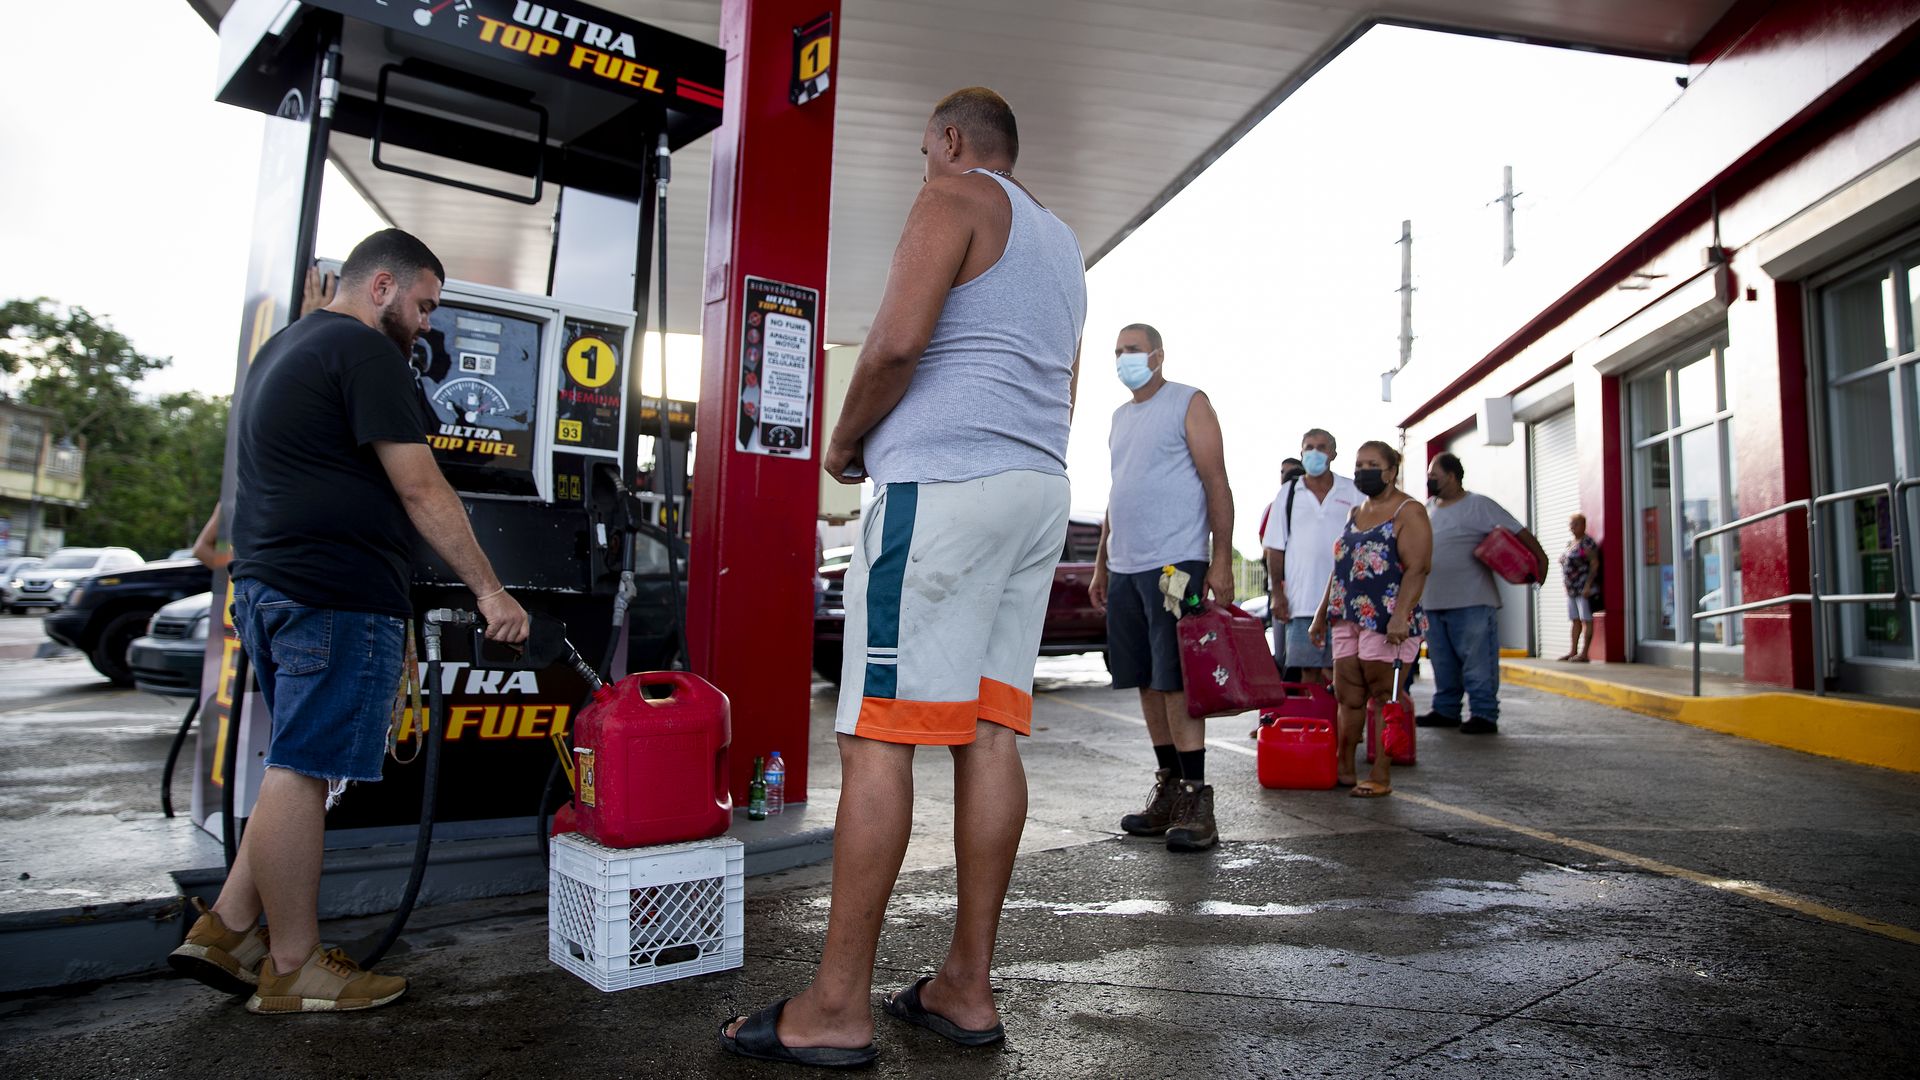 Photo of people waiting in line with jugs to fill up diesel at a gas station